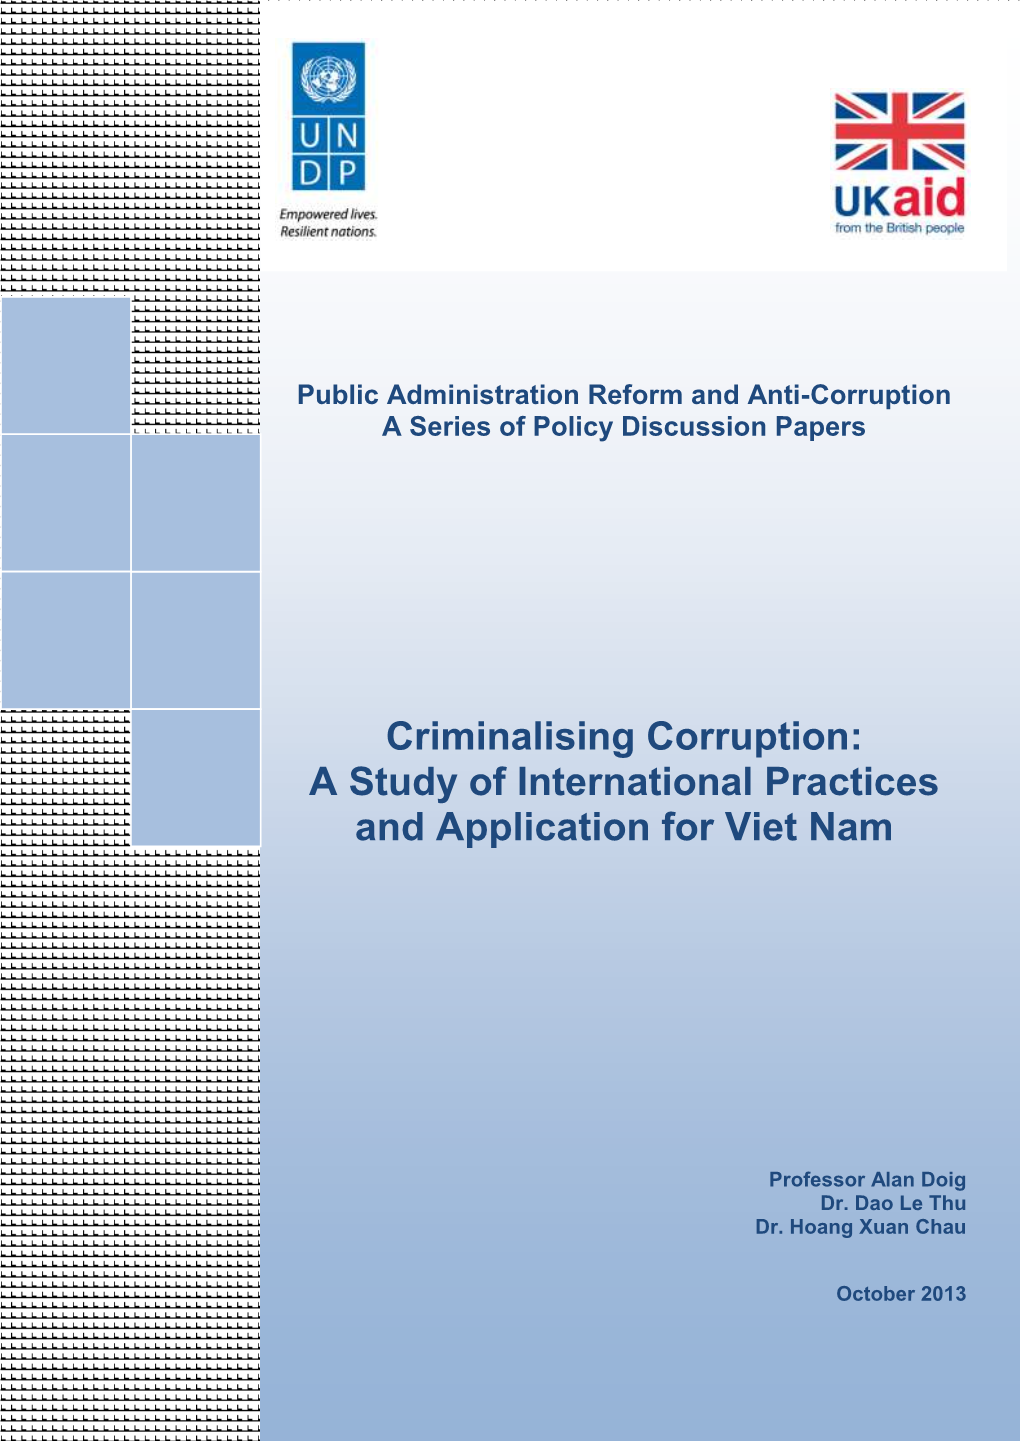 Corruption in Viet Nam: External and Internal Reviews of Corruption, Causes and Consequences in Viet Nam